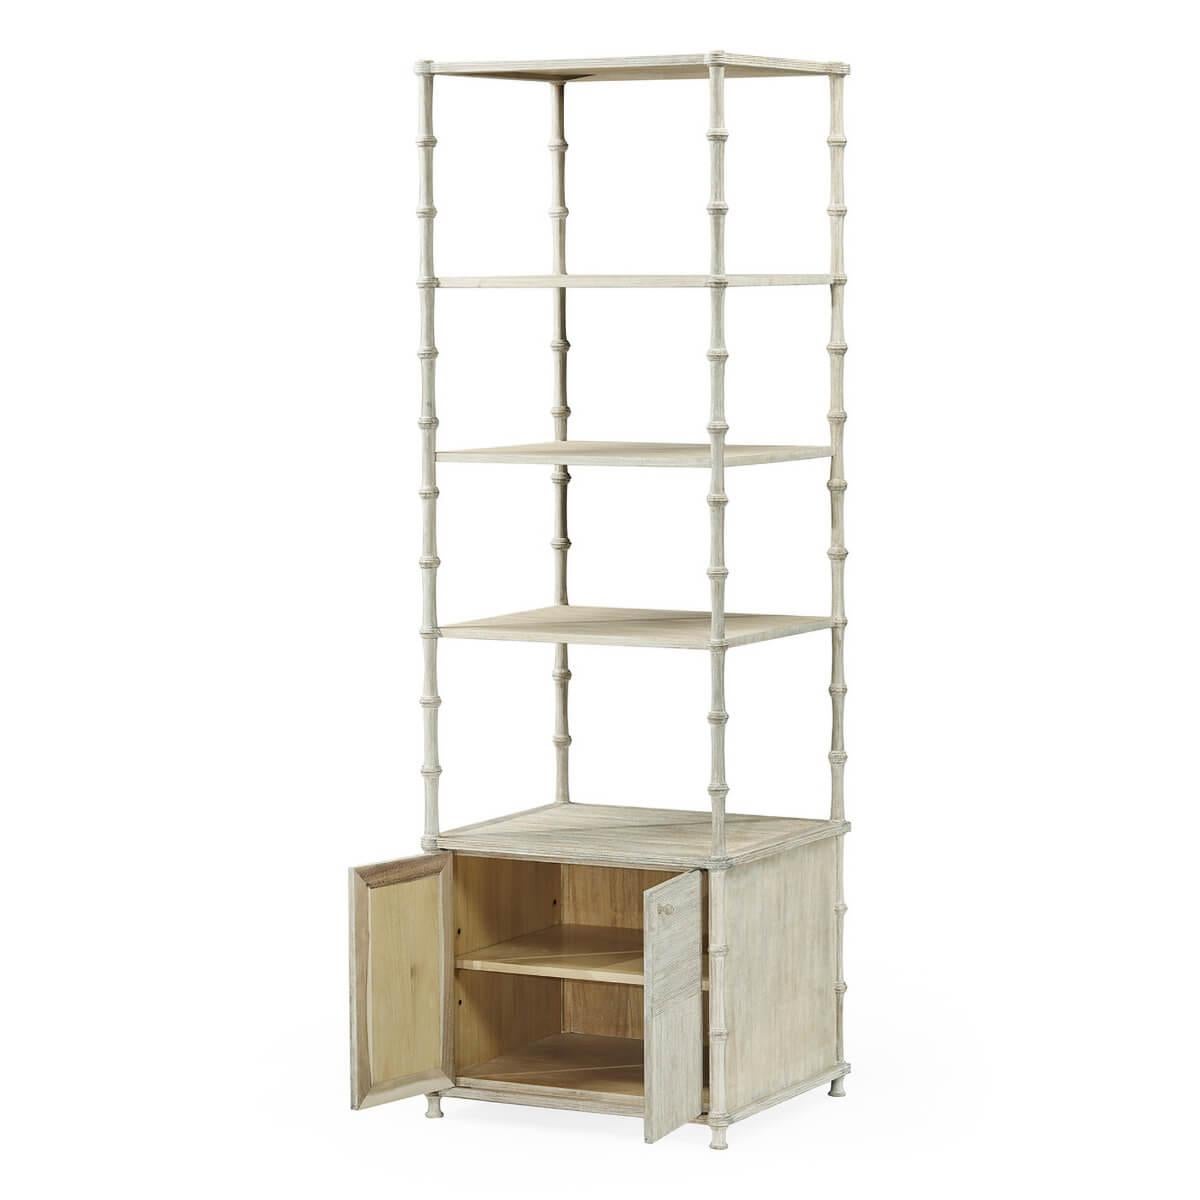 A Rustic country-style four-tier etagere with a wash-painted finish. With patchwork style tiers and a two-door cabinet below.

Dimensions: 28